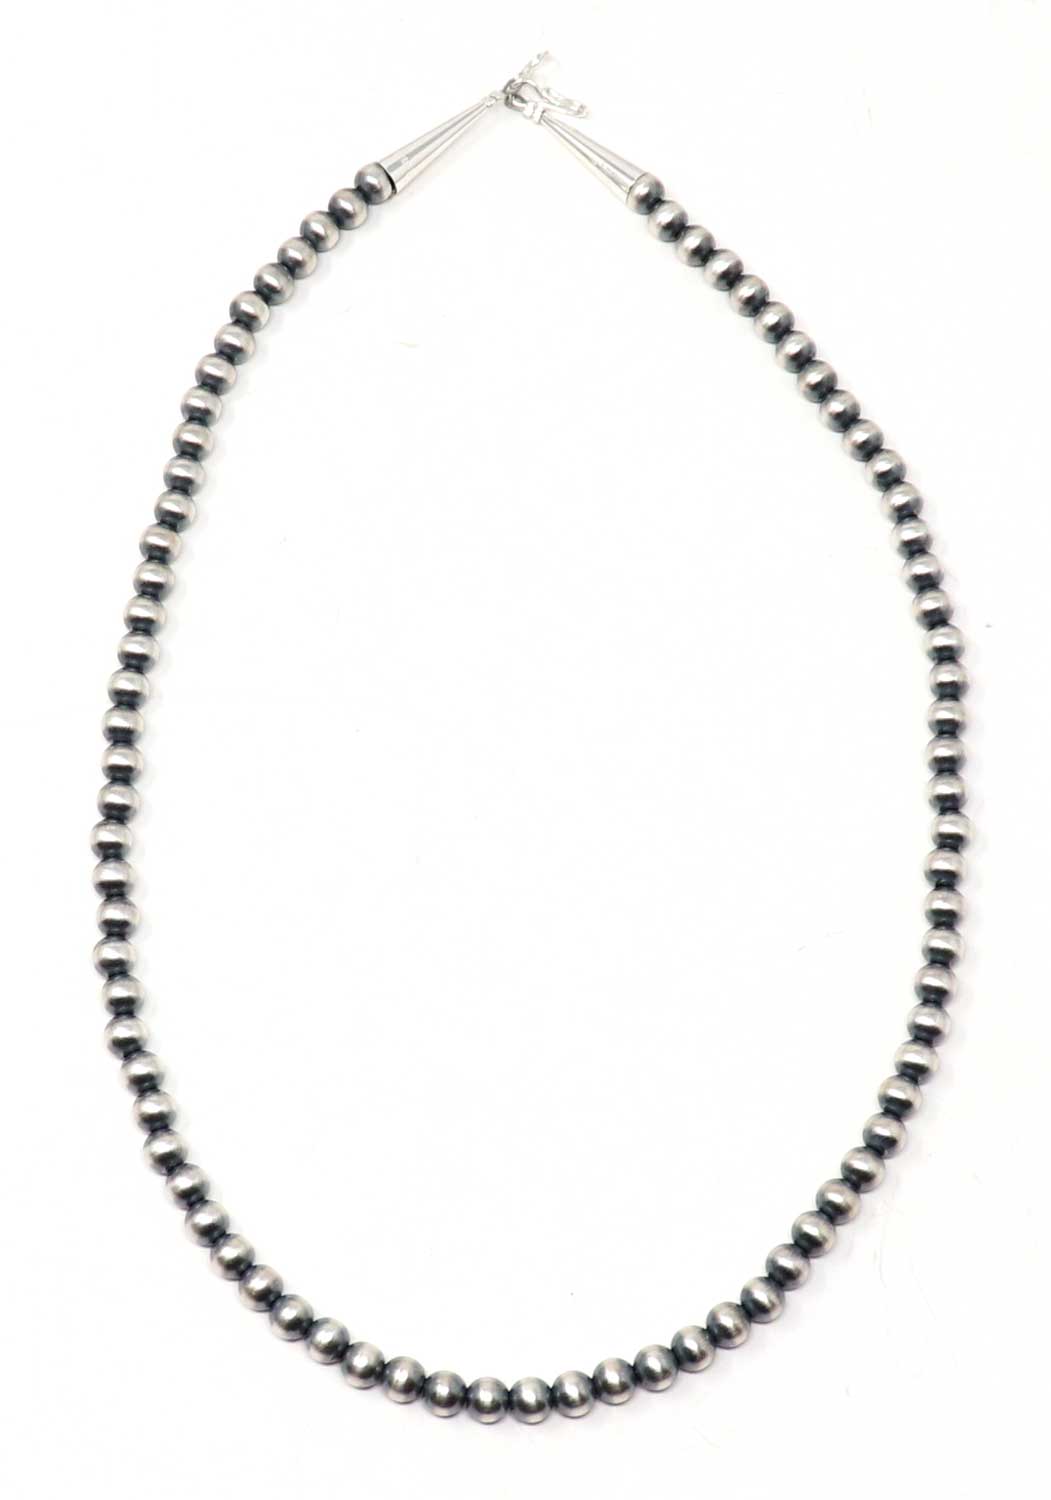 20" Sterling Silver Navajo Pearl Necklace